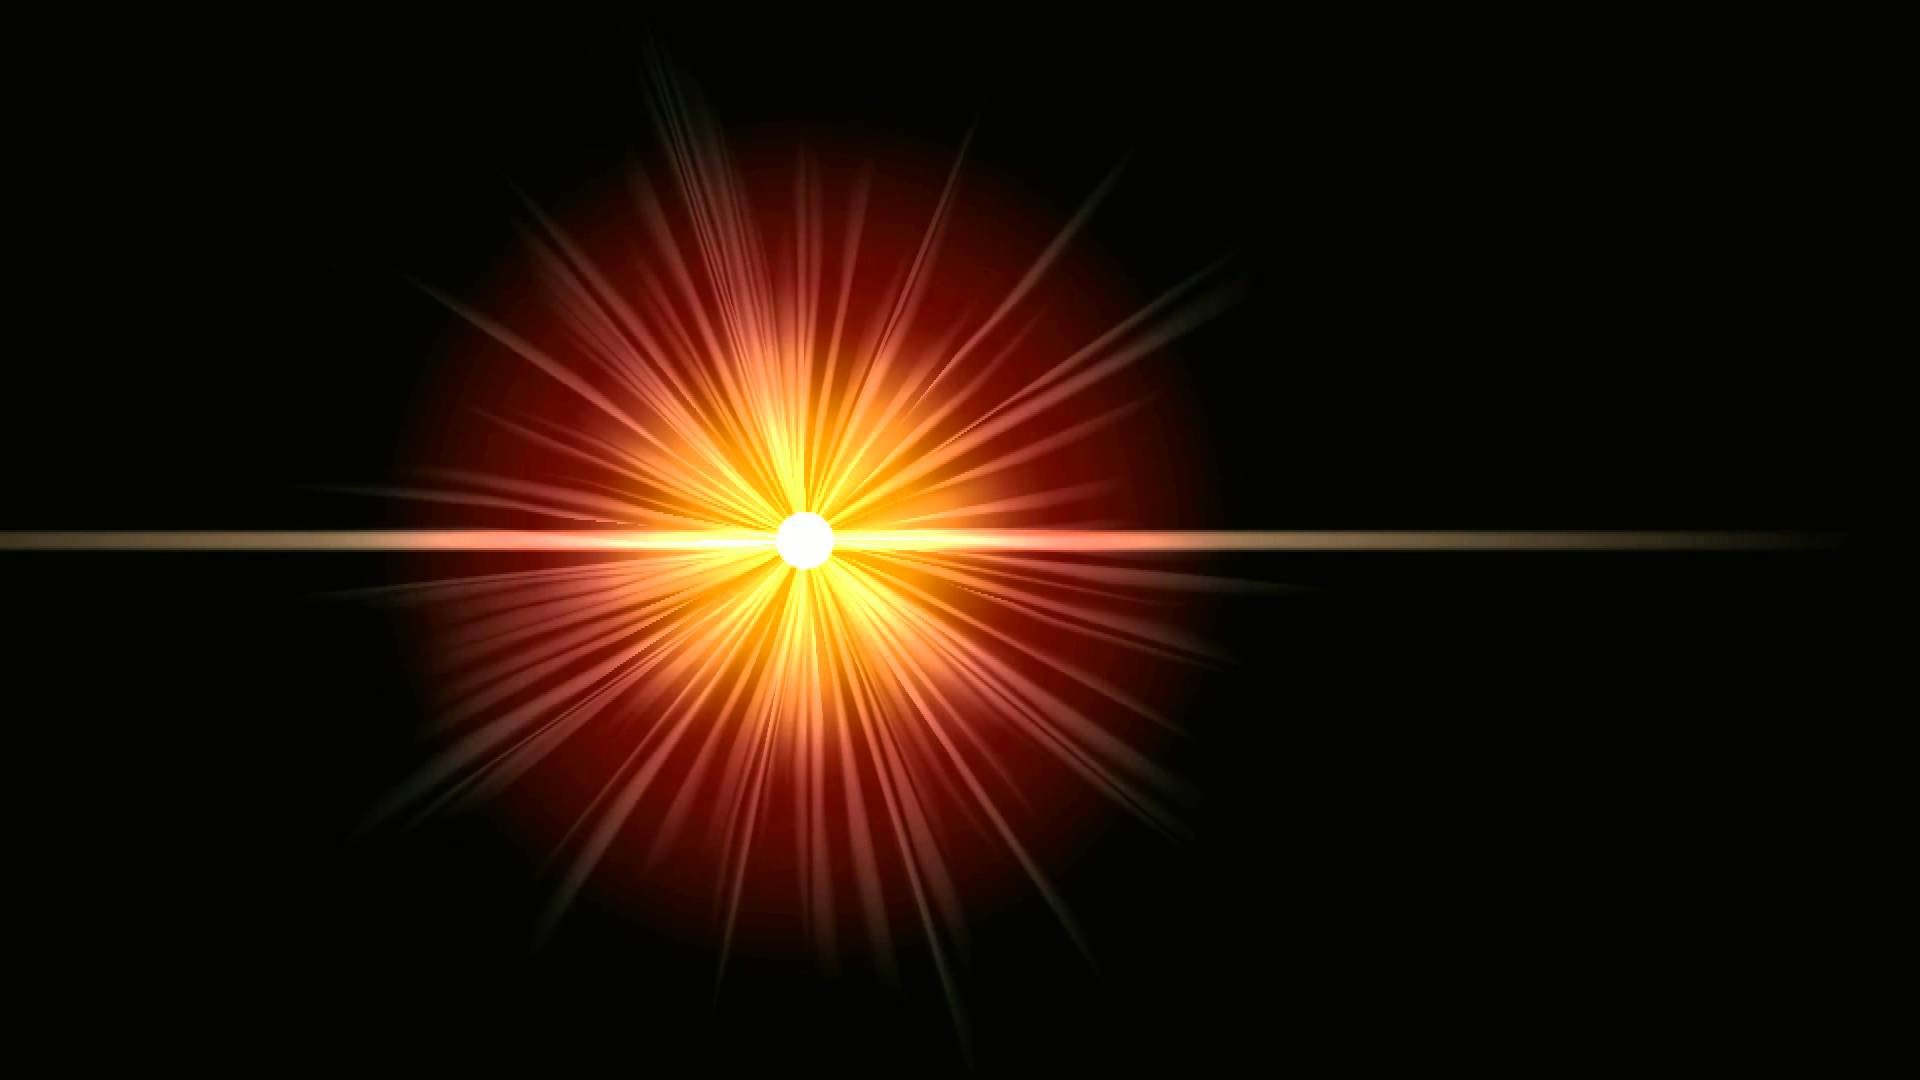 1920x1080 Amazing Shining Star with Golden Rays | Free Video Clip| Motion Background